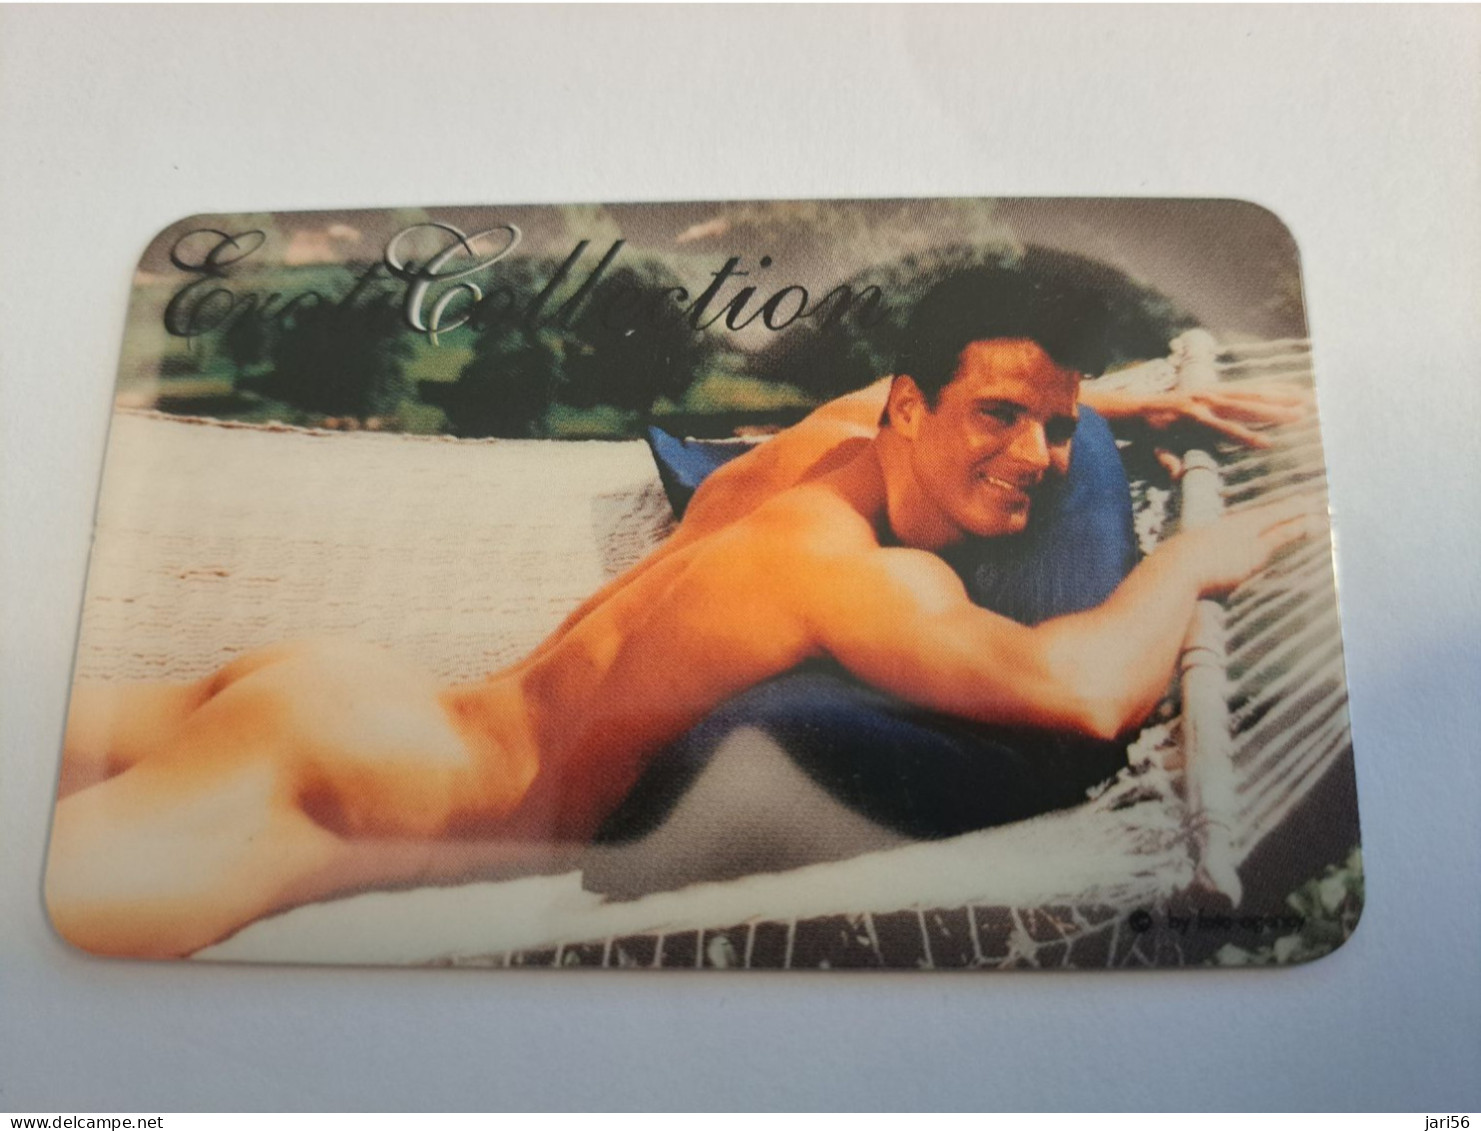 GREAT BRITAIN /20 UNITS / EROTIC COLLECTION / MODEL / NAKED MAN  / (date 09/00)  PREPAID CARD / MINT  **15905** - [10] Sammlungen